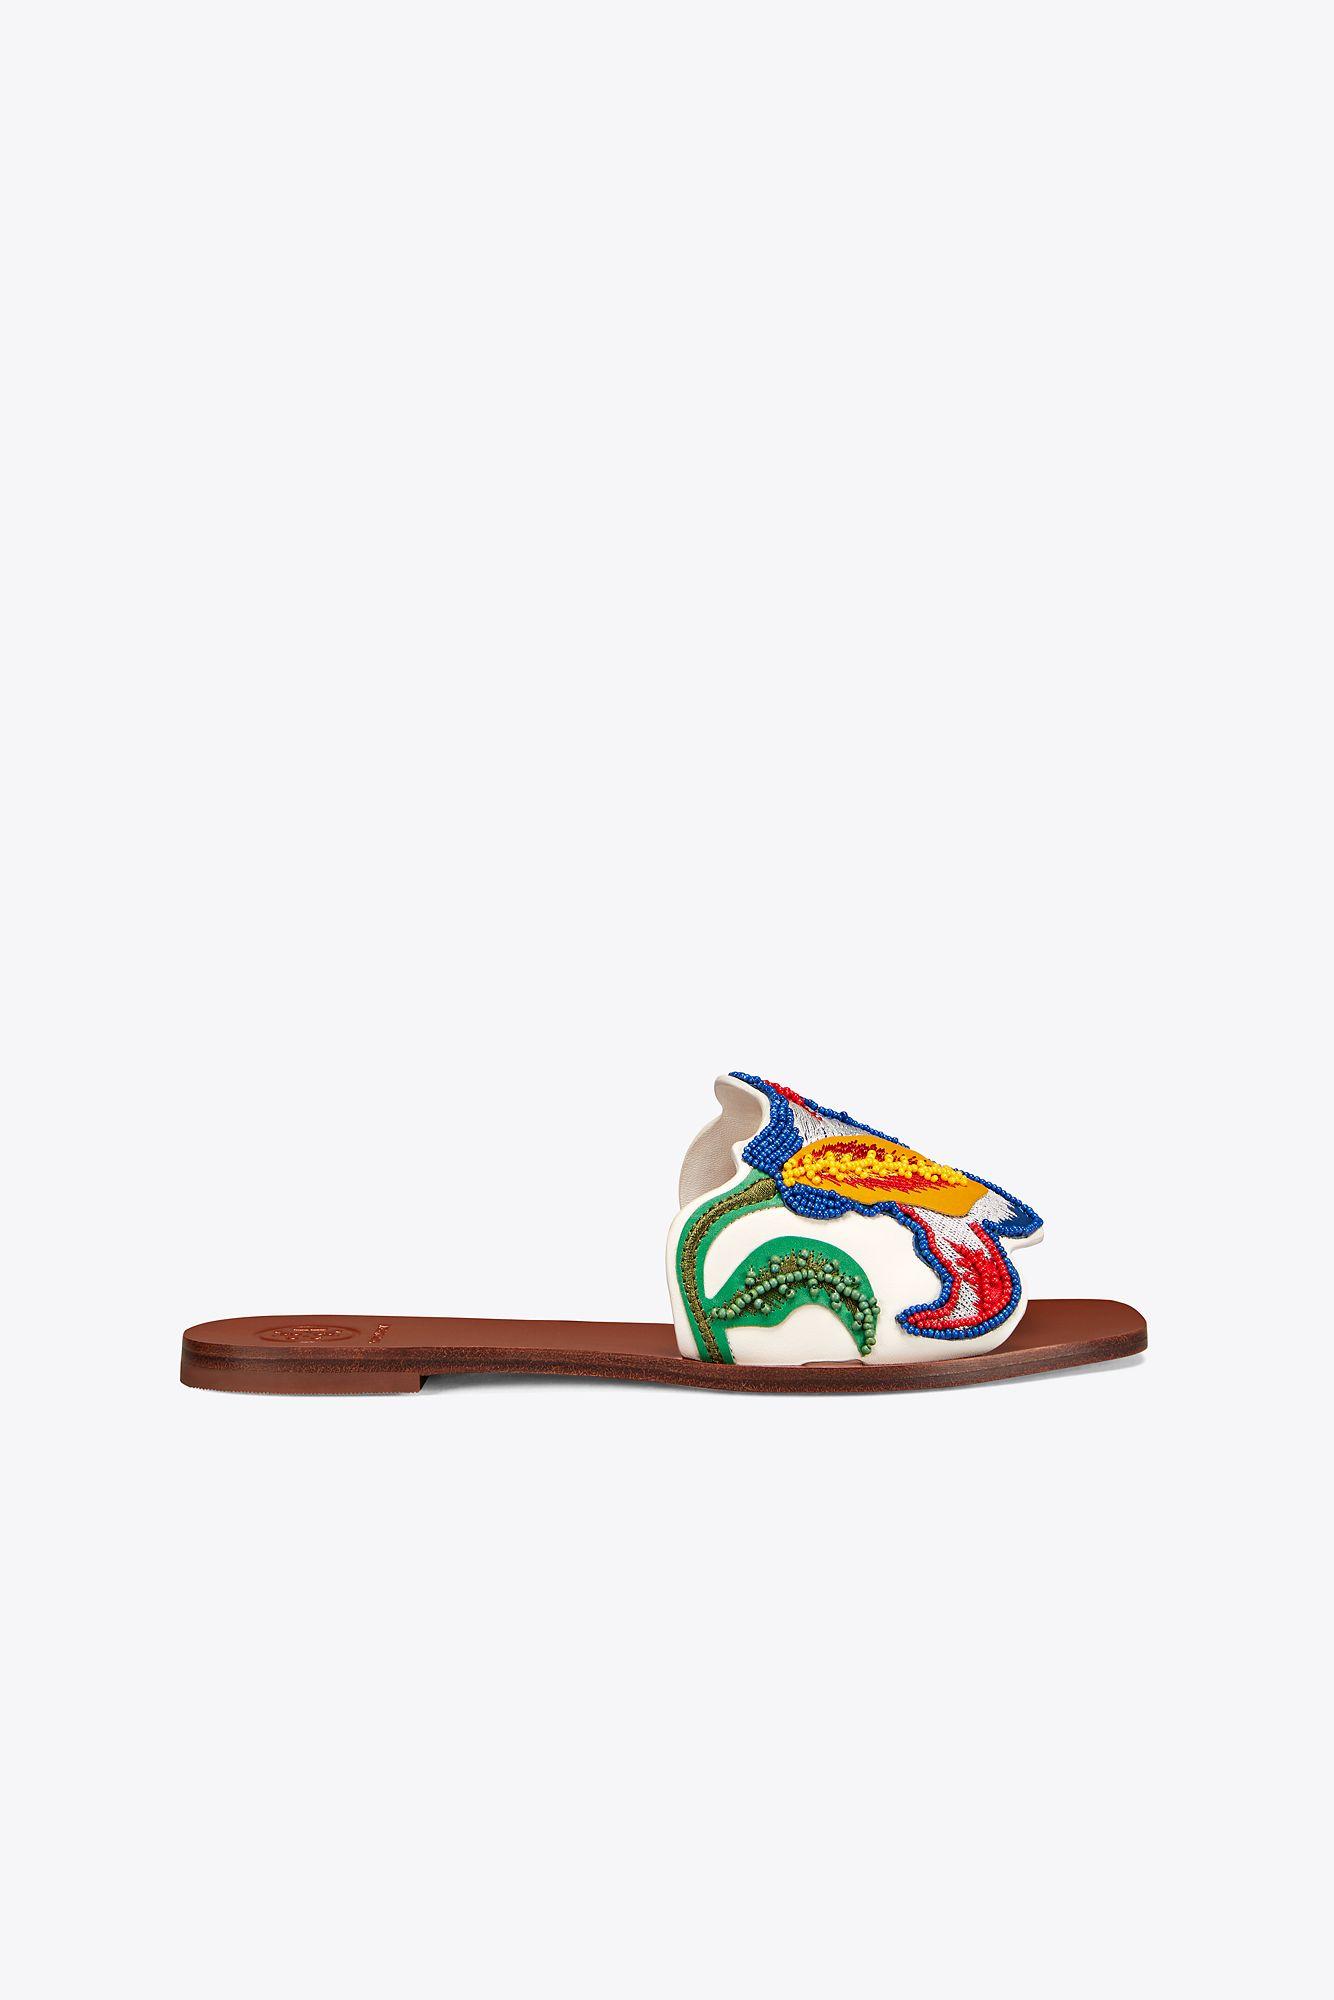 Tory Burch Multicolor Beads Embroidered Leather Bianca Slides Size 39 |  Lyst Canada